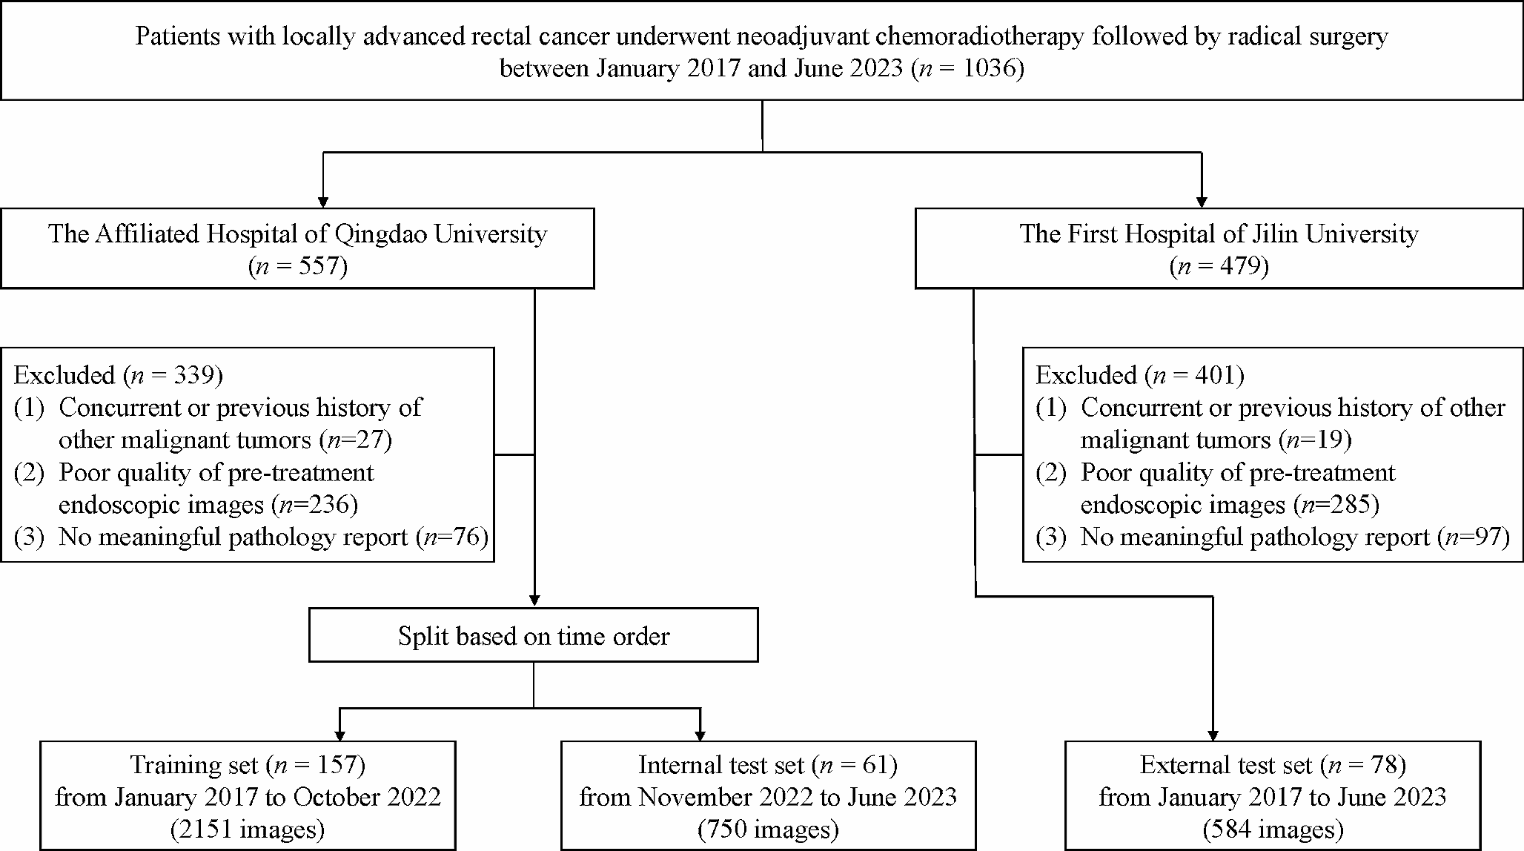 Deep learning model based on endoscopic images predicting treatment response in locally advanced rectal cancer undergo neoadjuvant chemoradiotherapy: a multicenter study